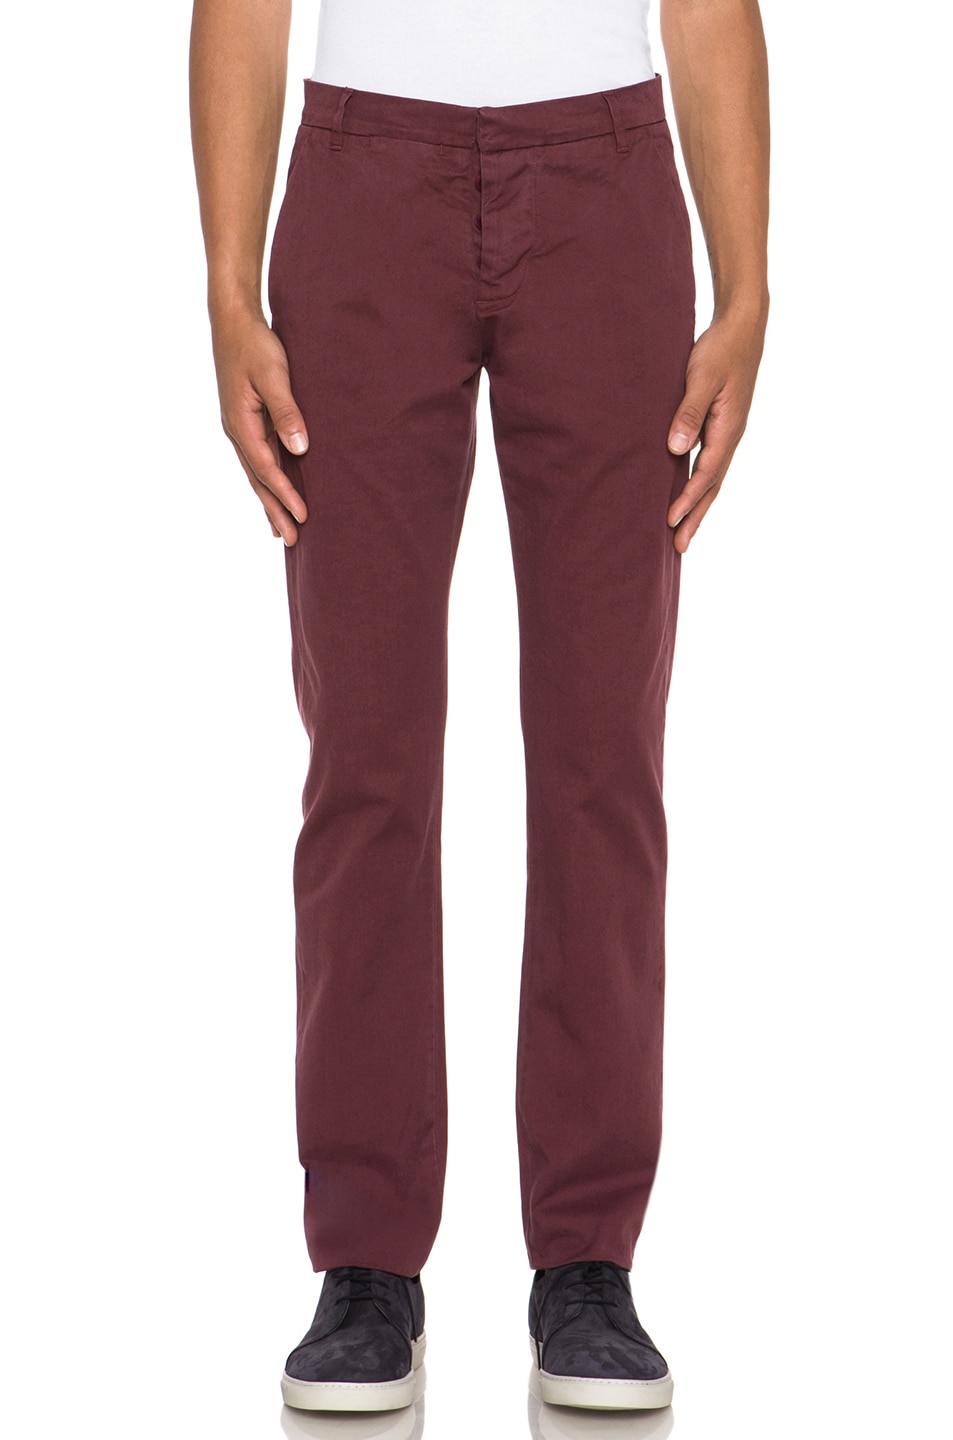 Image 1 of Band of Outsiders Chino Pant in Port